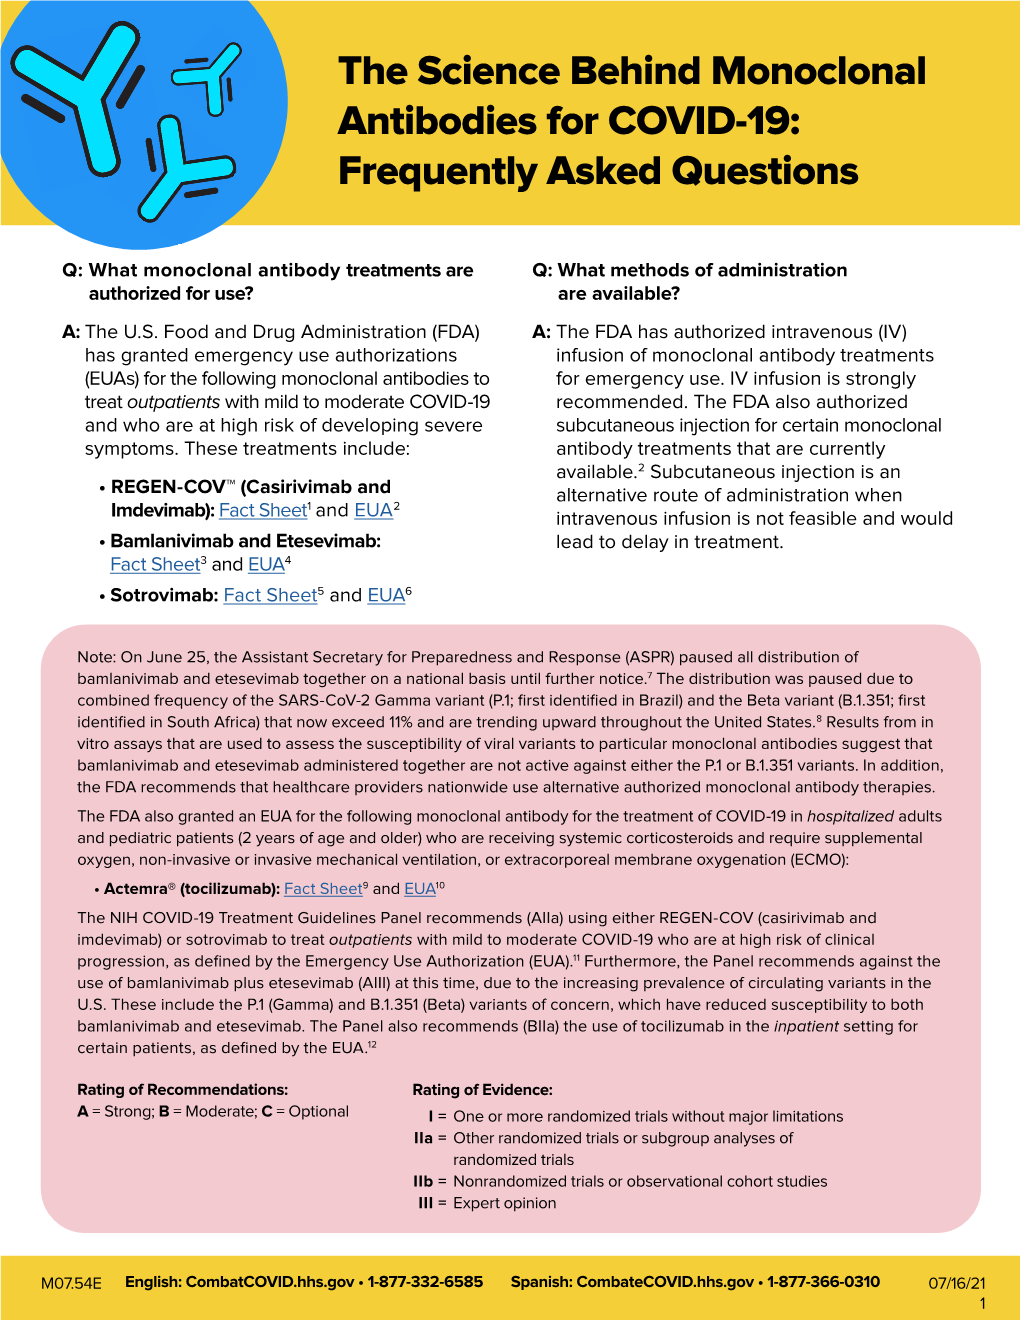 The Science Behind Monoclonal Antibodies for COVID-19: Frequently Asked Questions